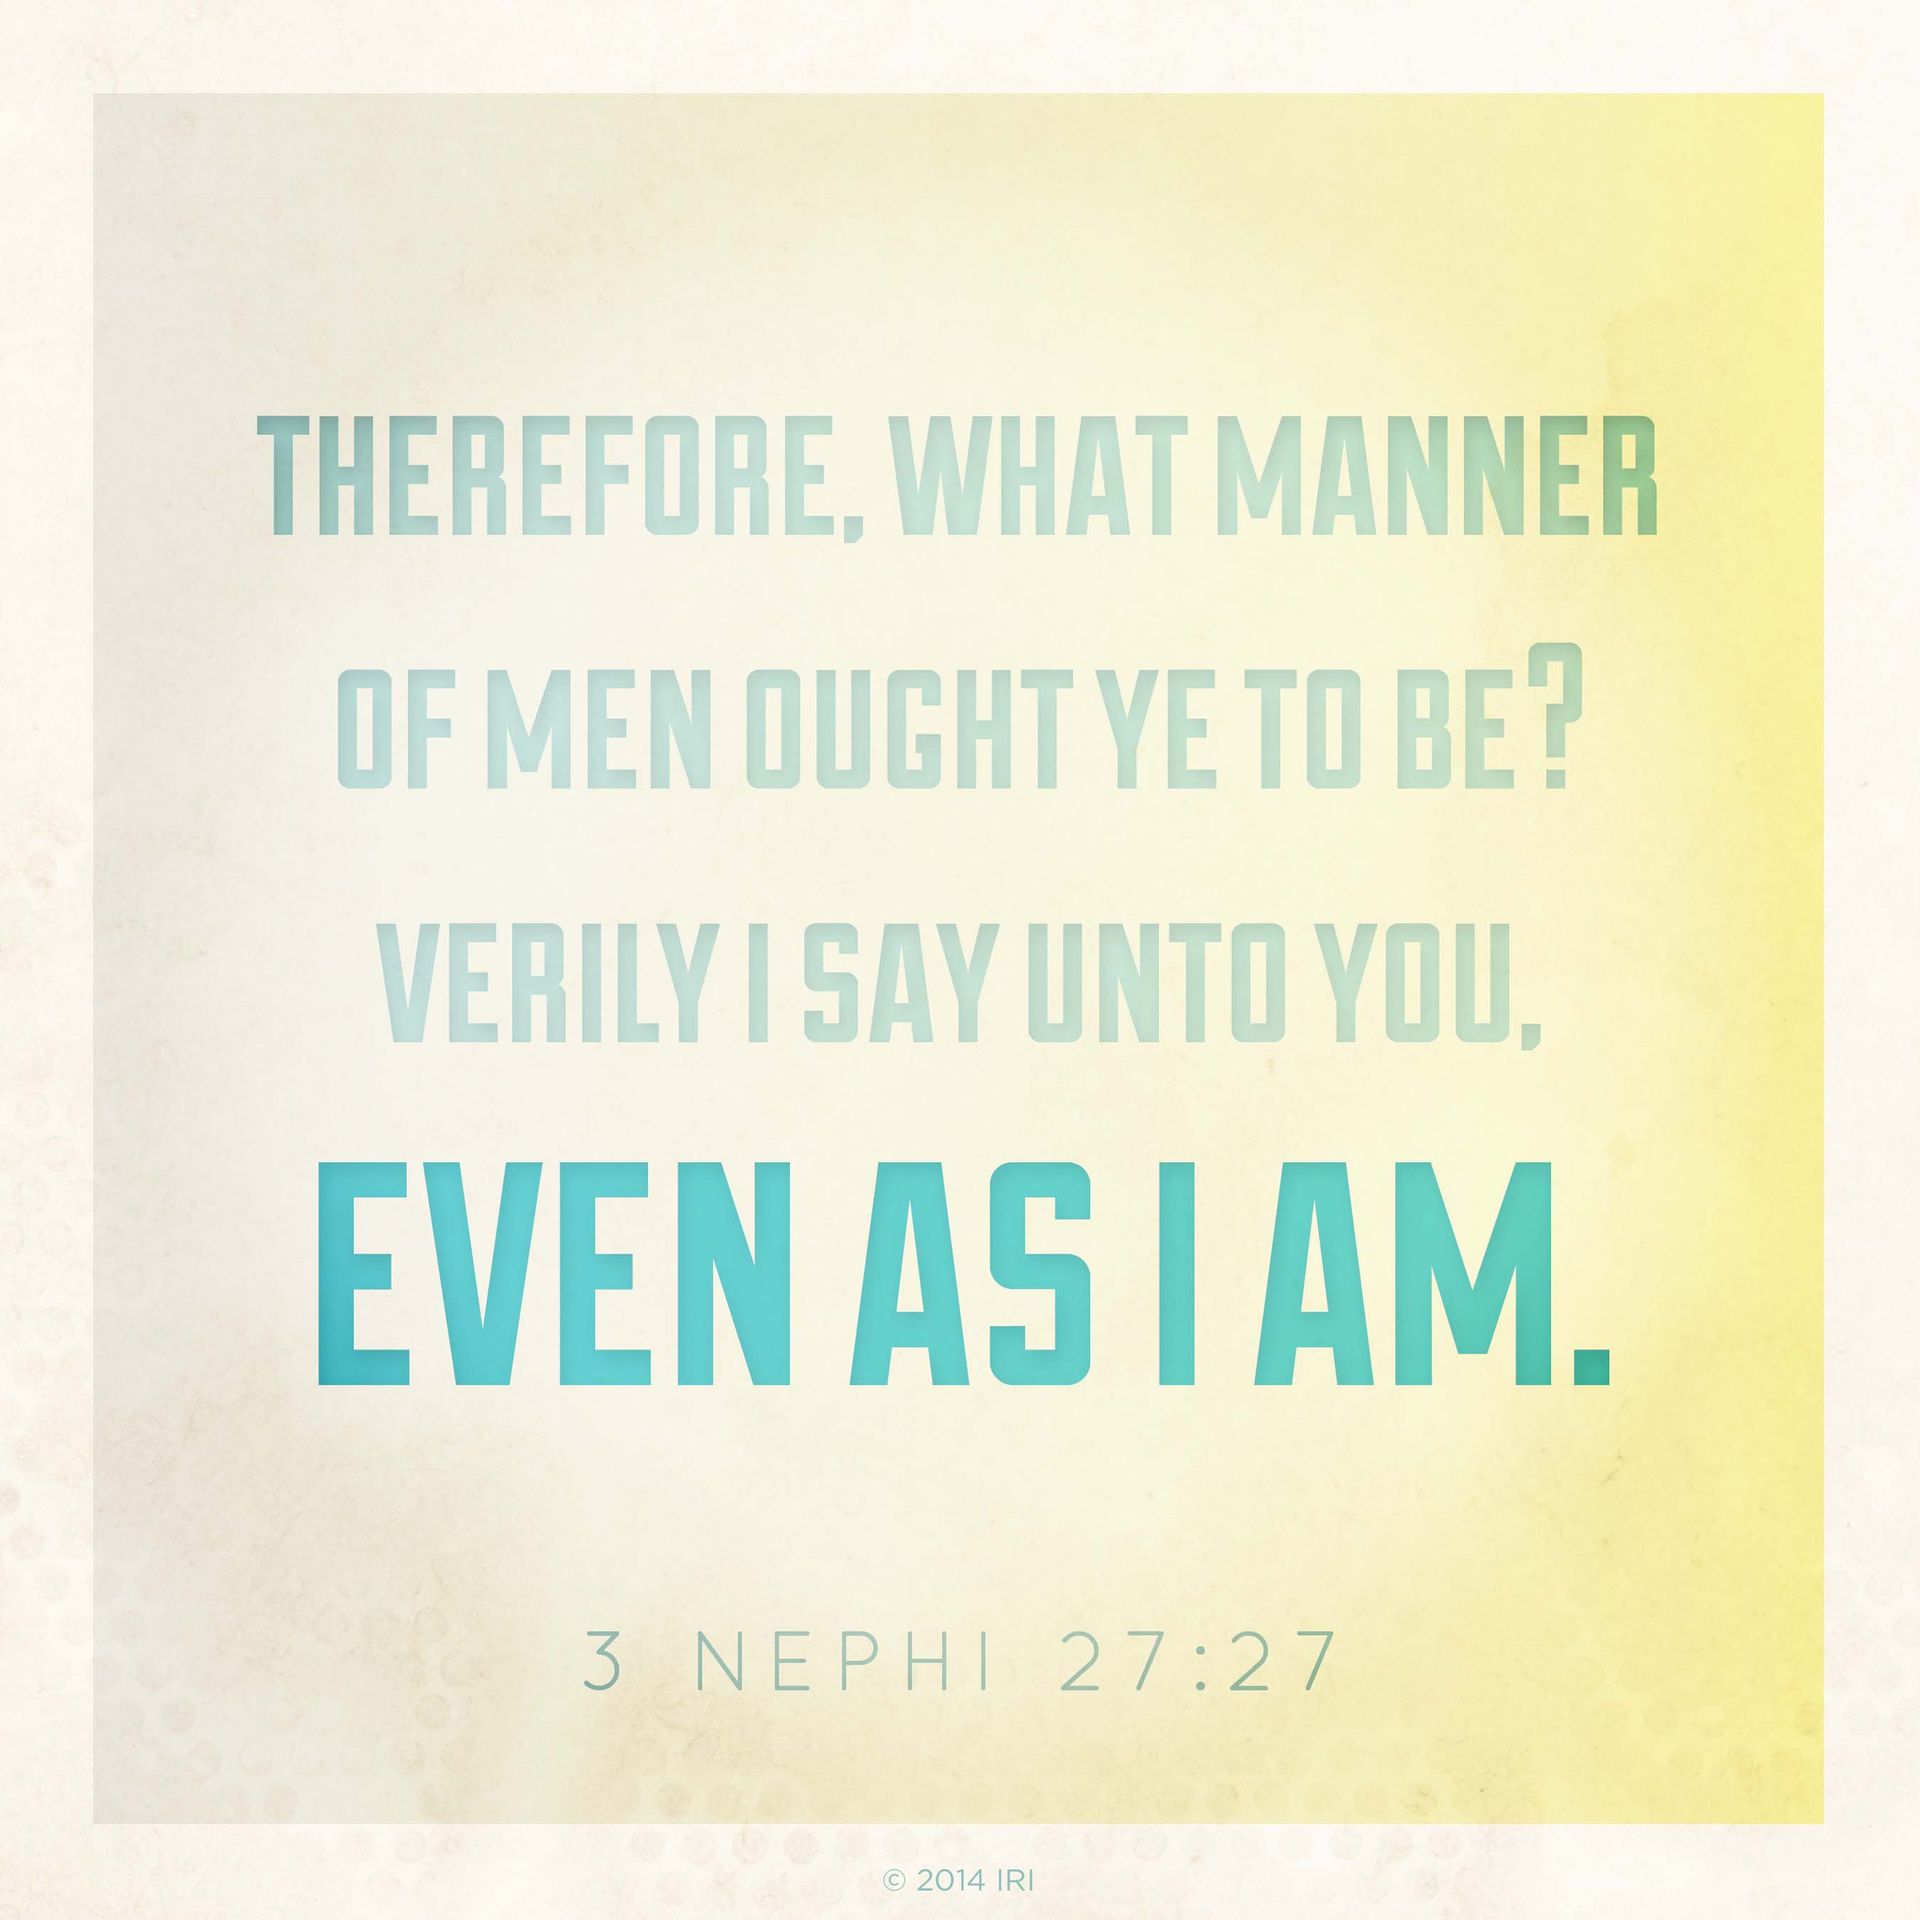 “Therefore, what manner of men ought ye to be? Verily I say unto you, even as I am.”—3 Nephi 27:27